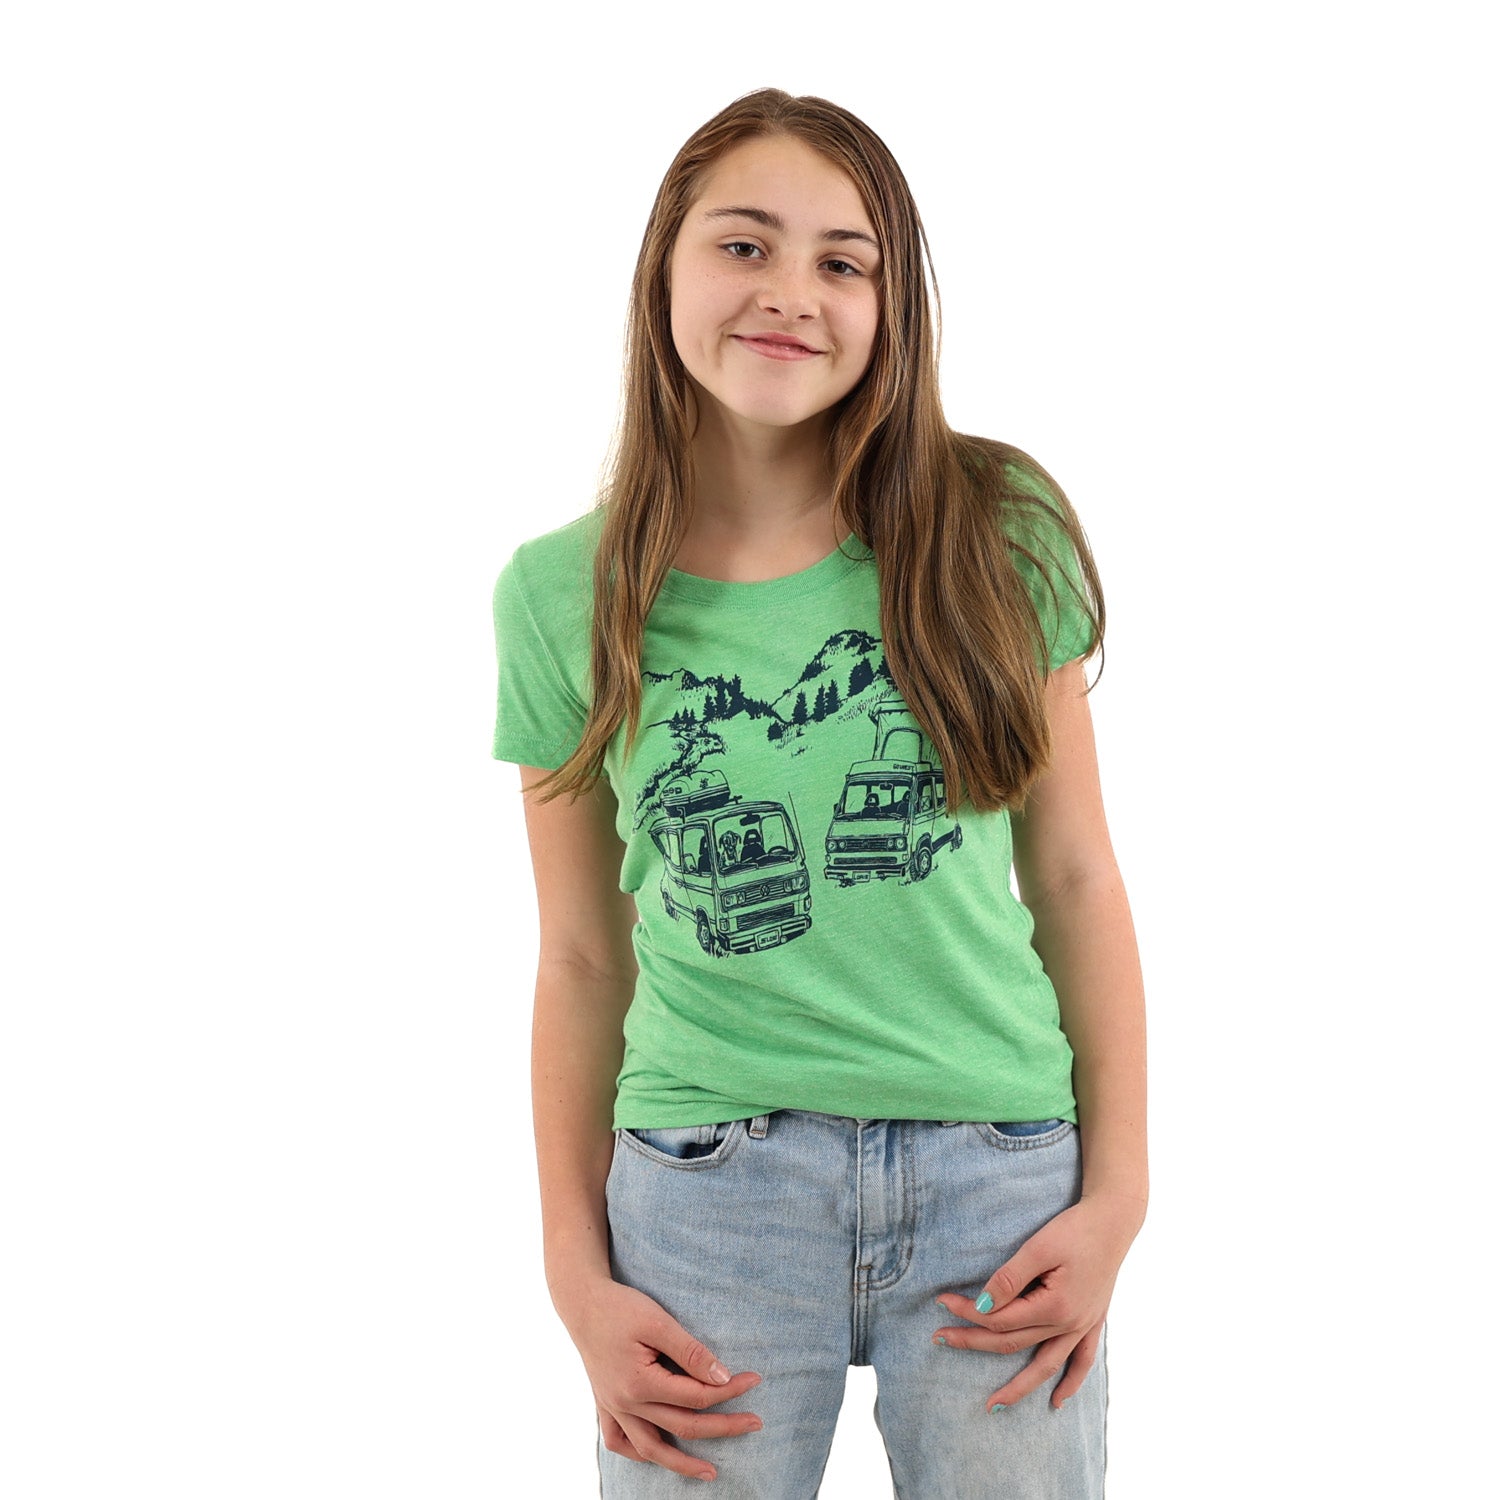 Young girl wearing green t shirt with westfalia scene in blue ink.